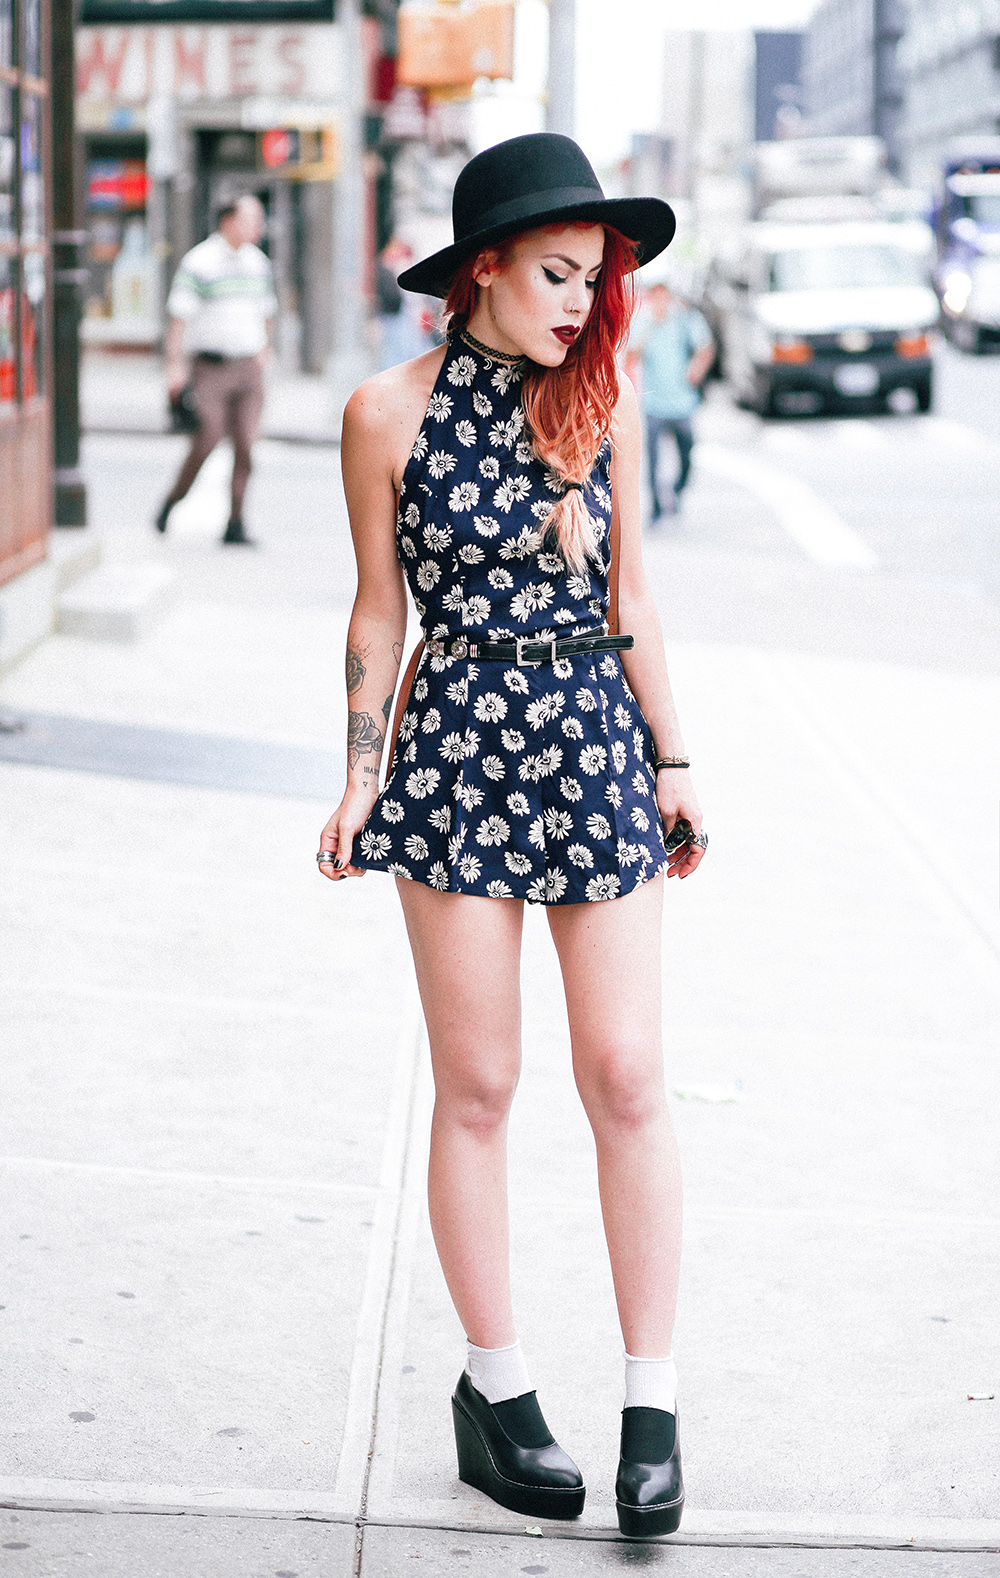 Le Happy wearing floral romper from Asos and a fedora hat